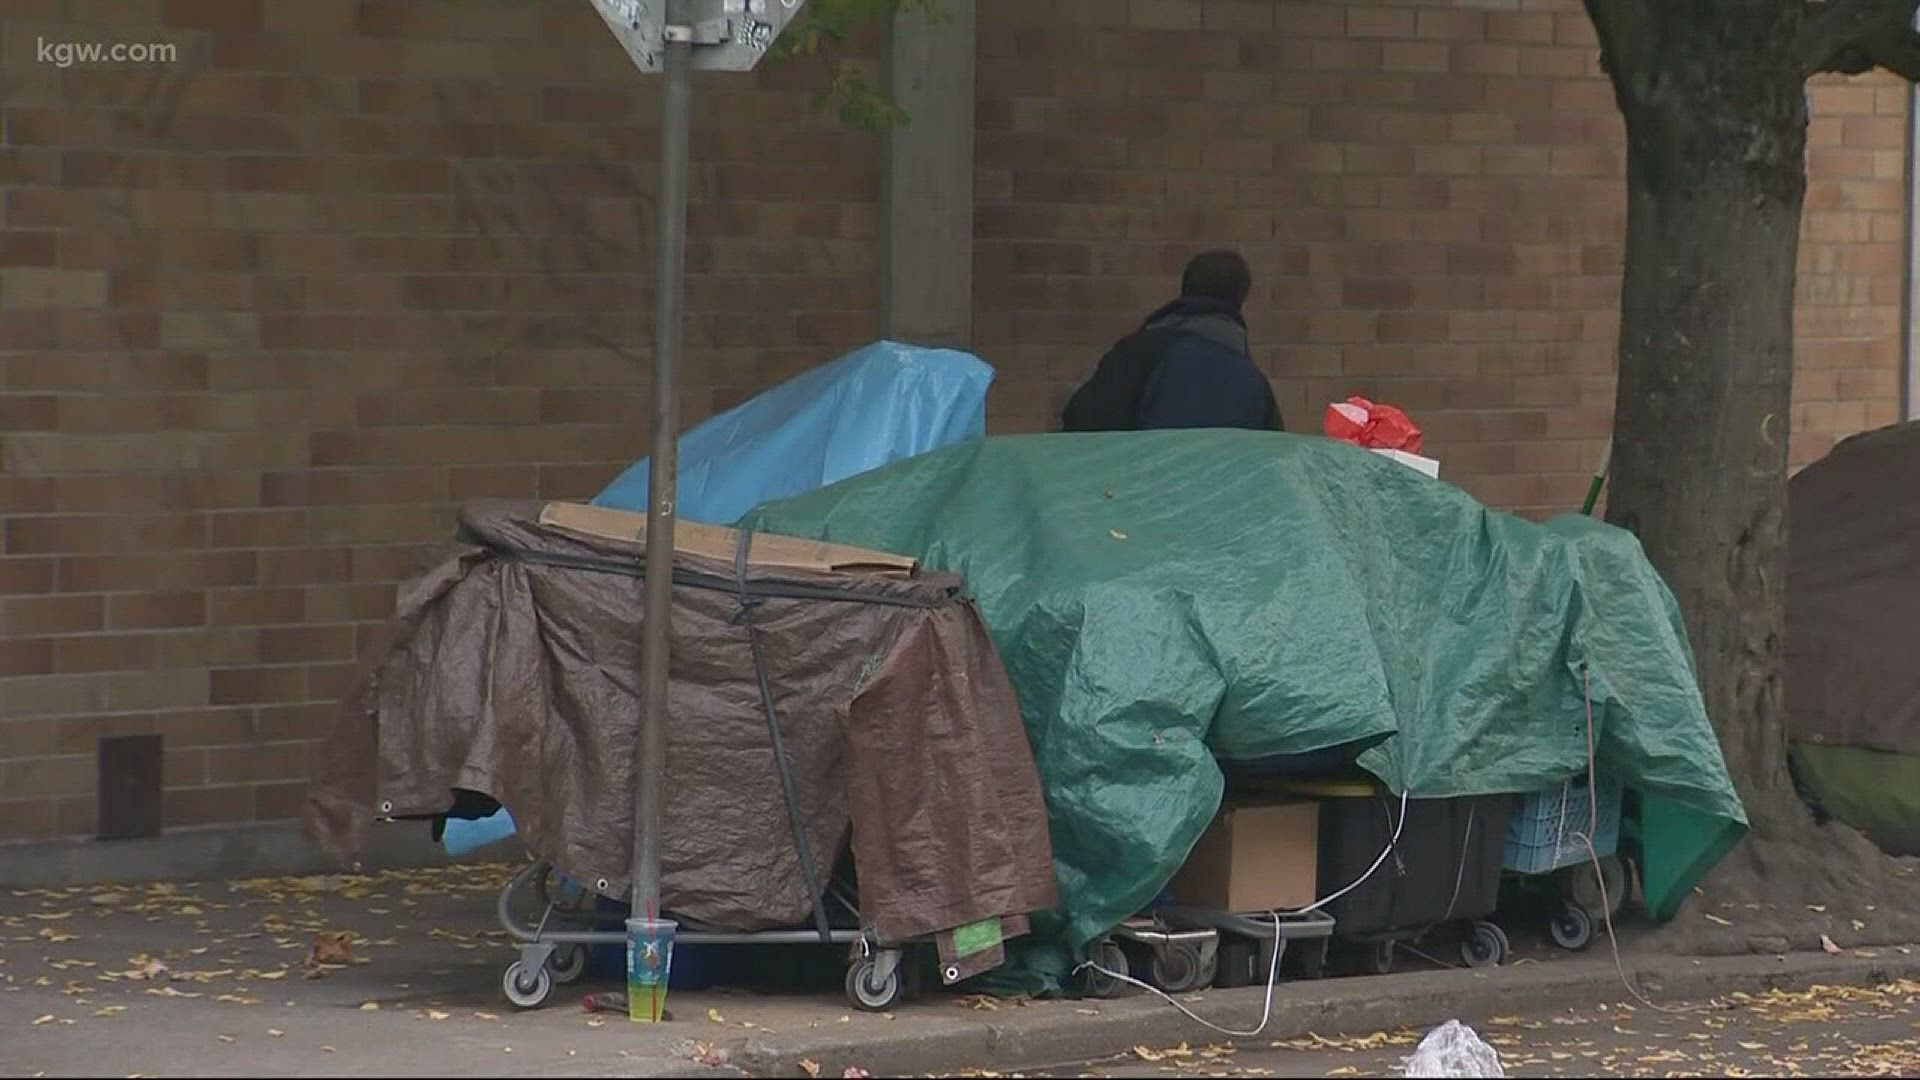 Businesses are concerned about safety downtown due to homeless.